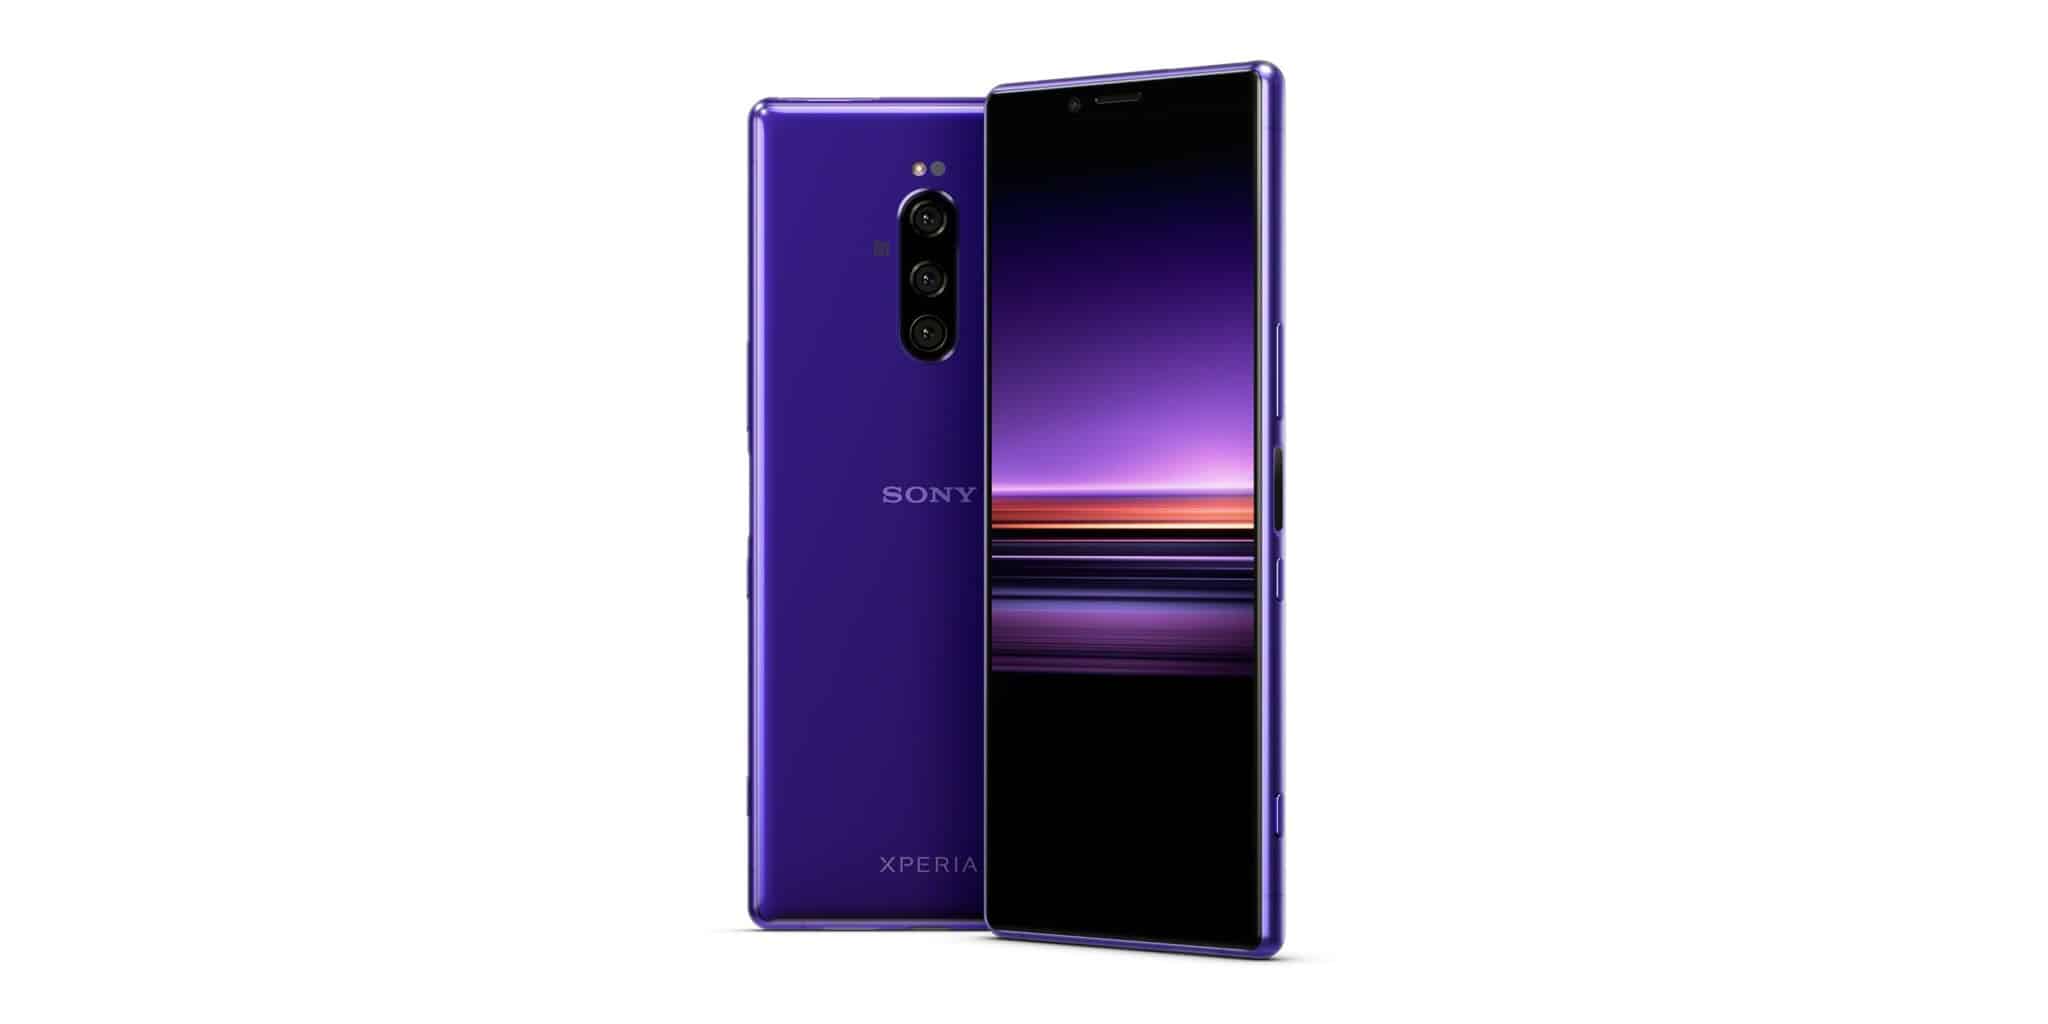 Sony starts innovative with its xperia 1 flagship with 21:9 cinematic 4k oled screen & triple digital cameras